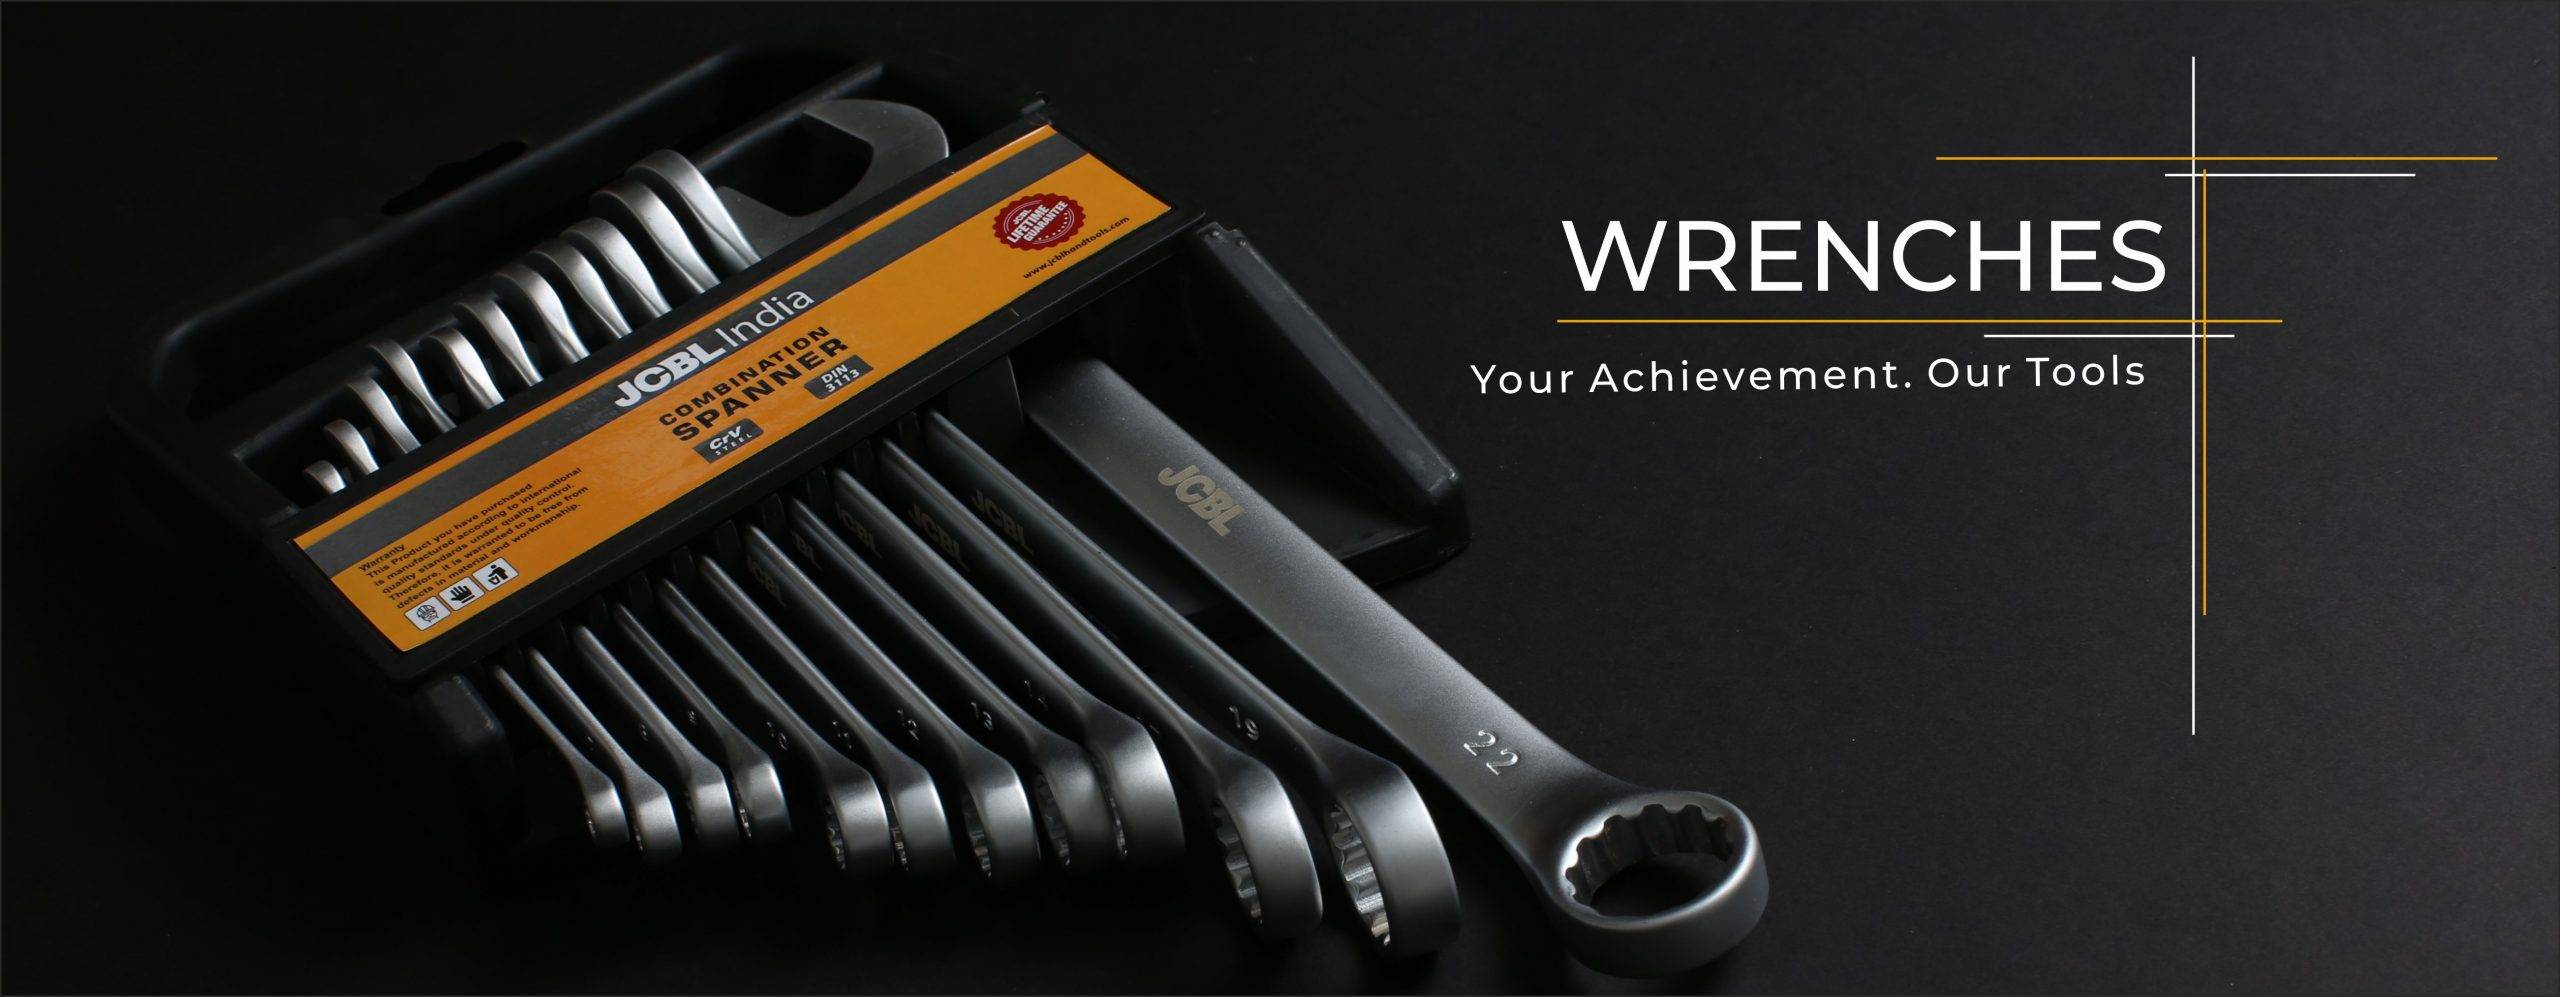 Wrenches Banner Image - JCBL